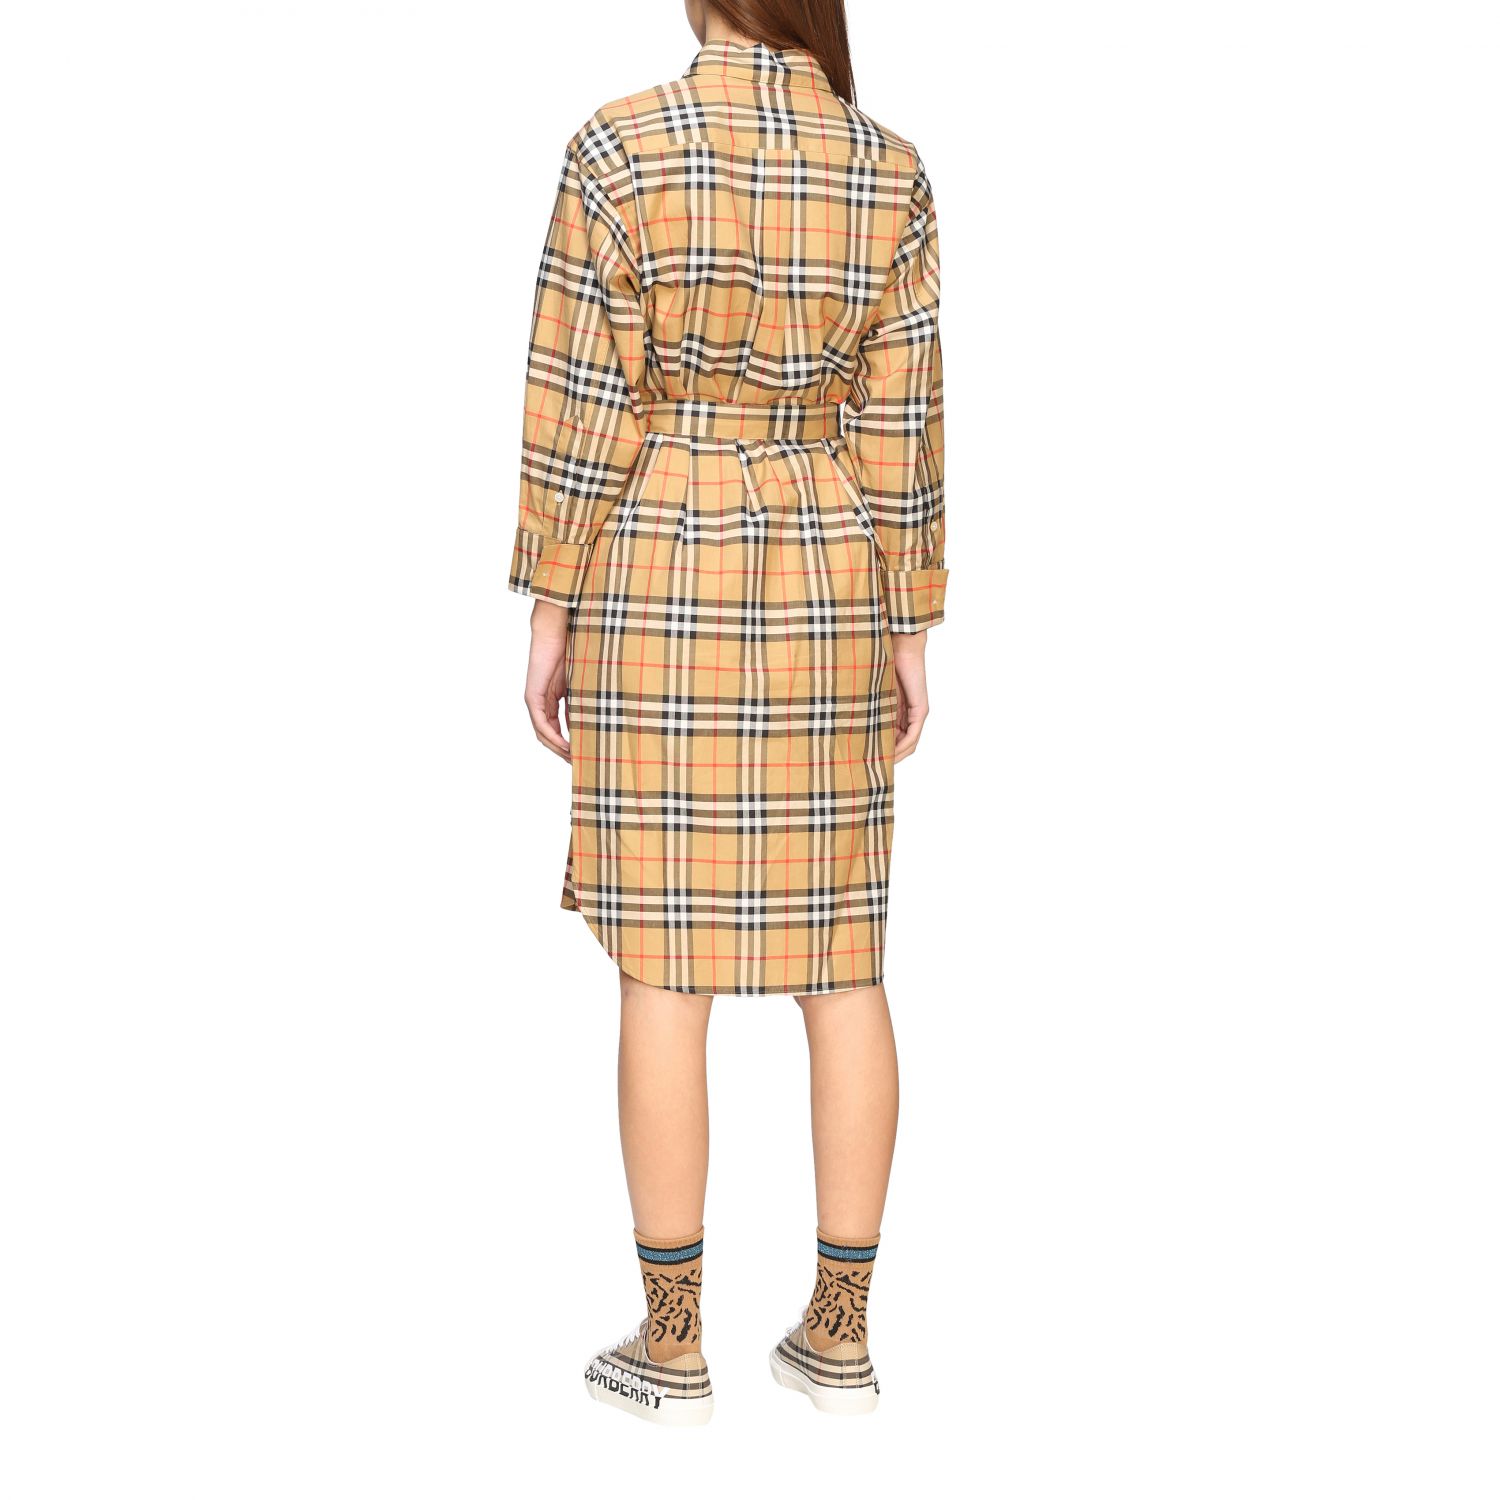 burberry isotto dress